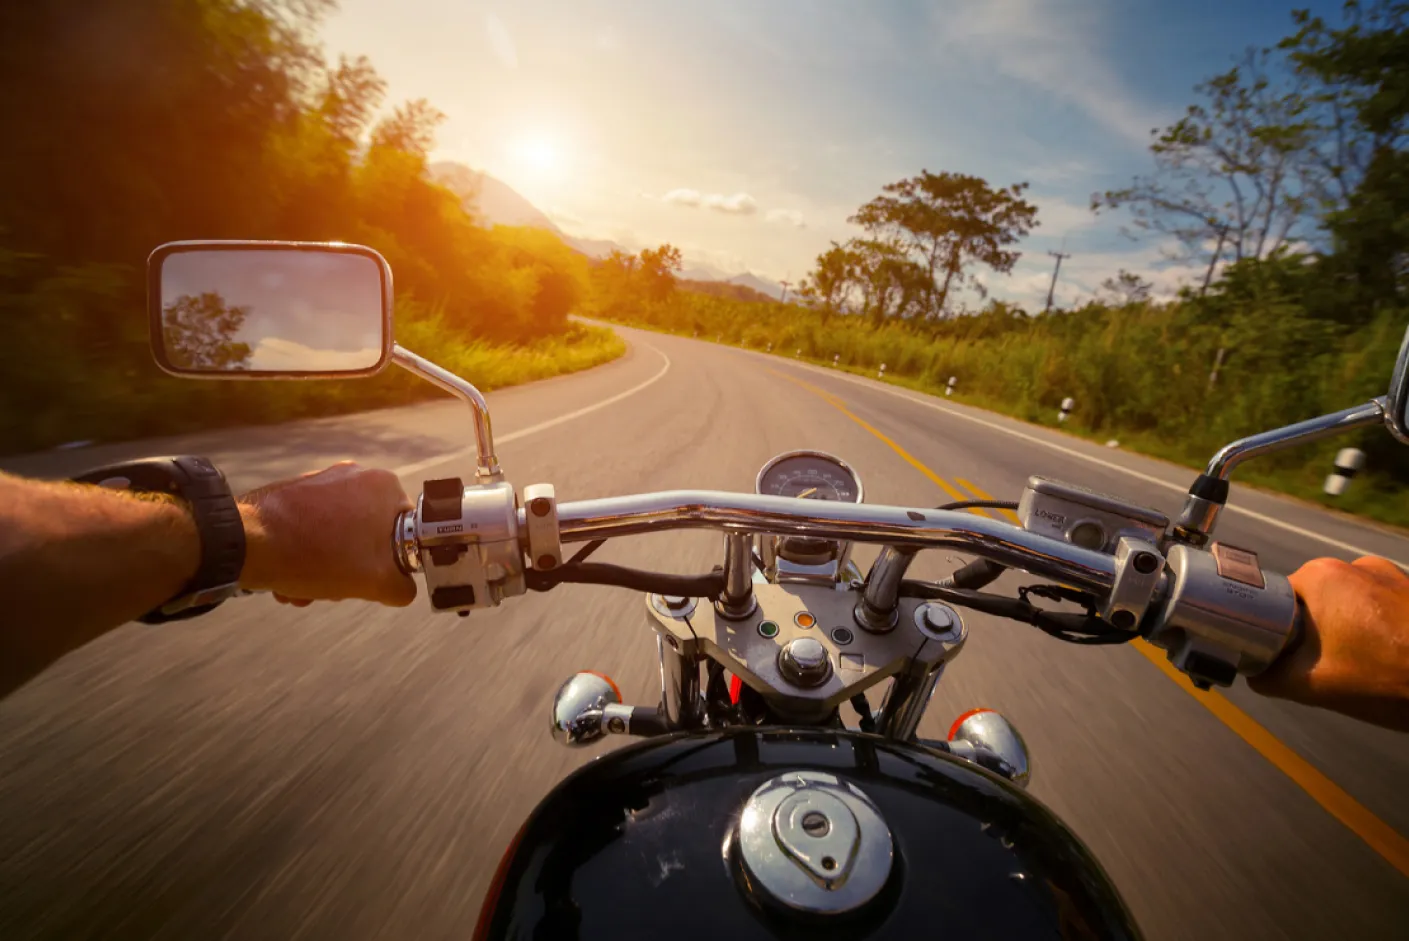 This guide is related to Nova Scotia motorcycle license test